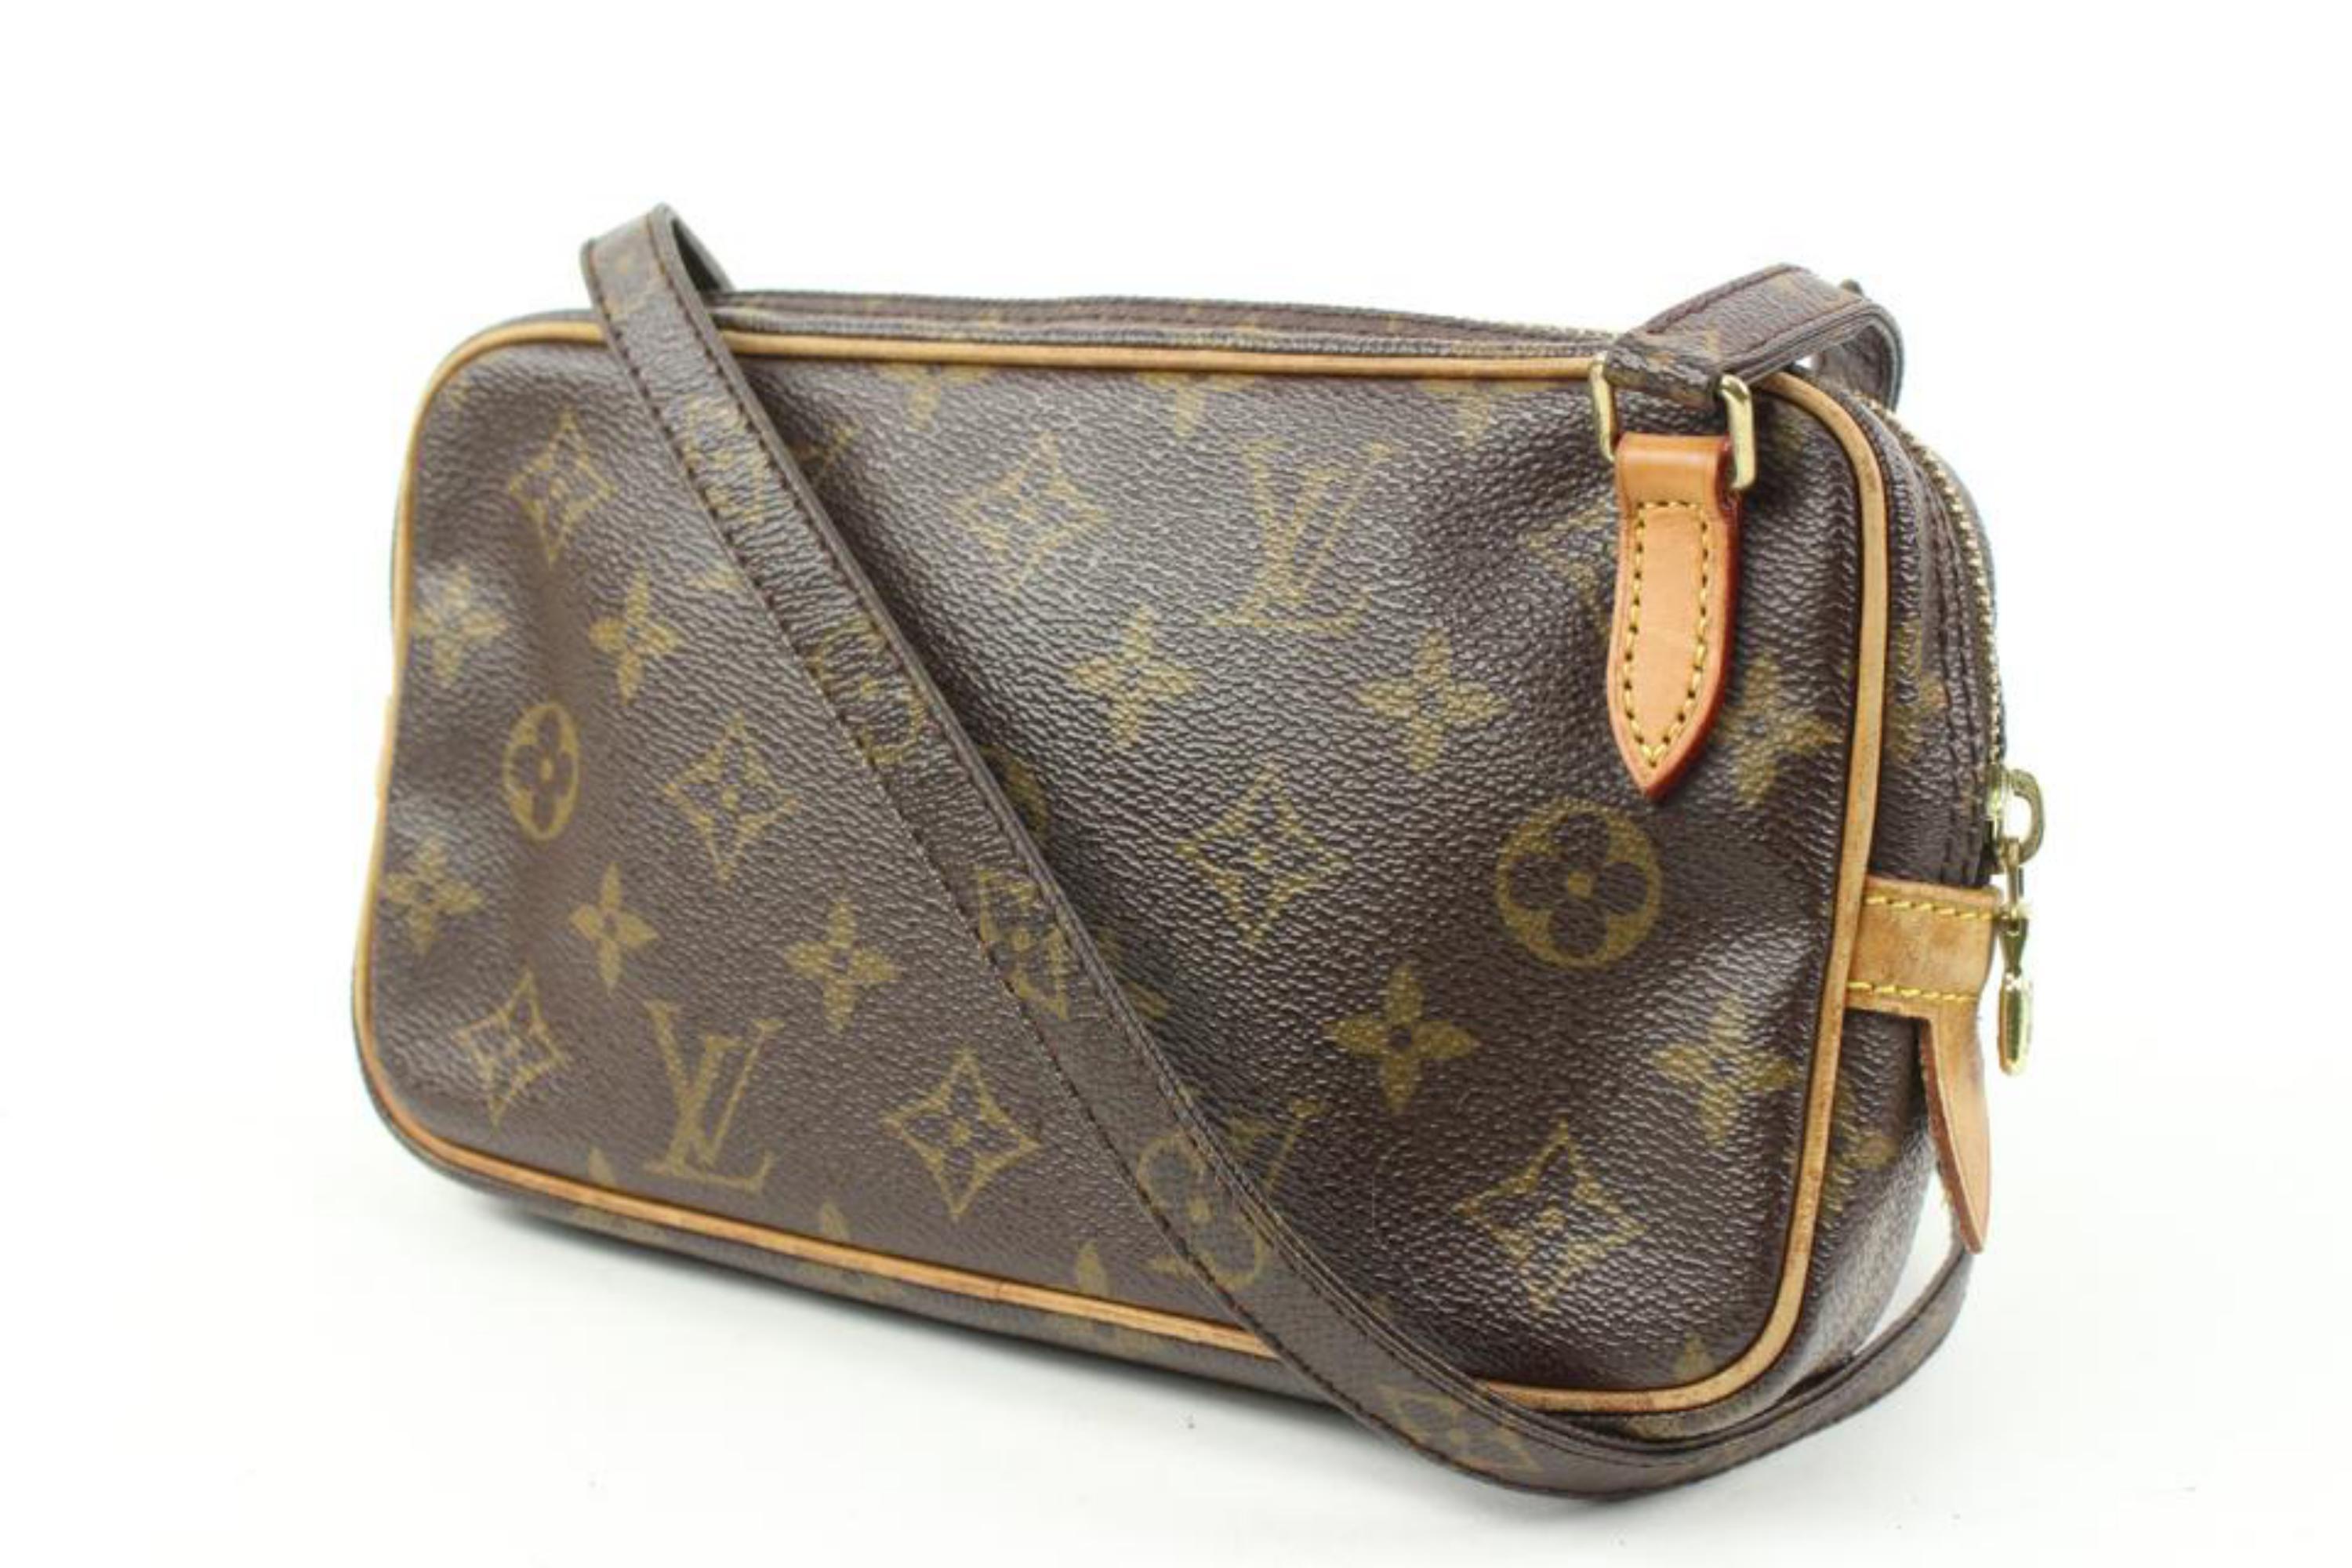 Louis Vuitton Discontinued Monogram Pochette Marly Bandouliere Crossbody 9lv126s
Date Code/Serial Number: DU0023
Made In: France
Measurements: Length:  8.5